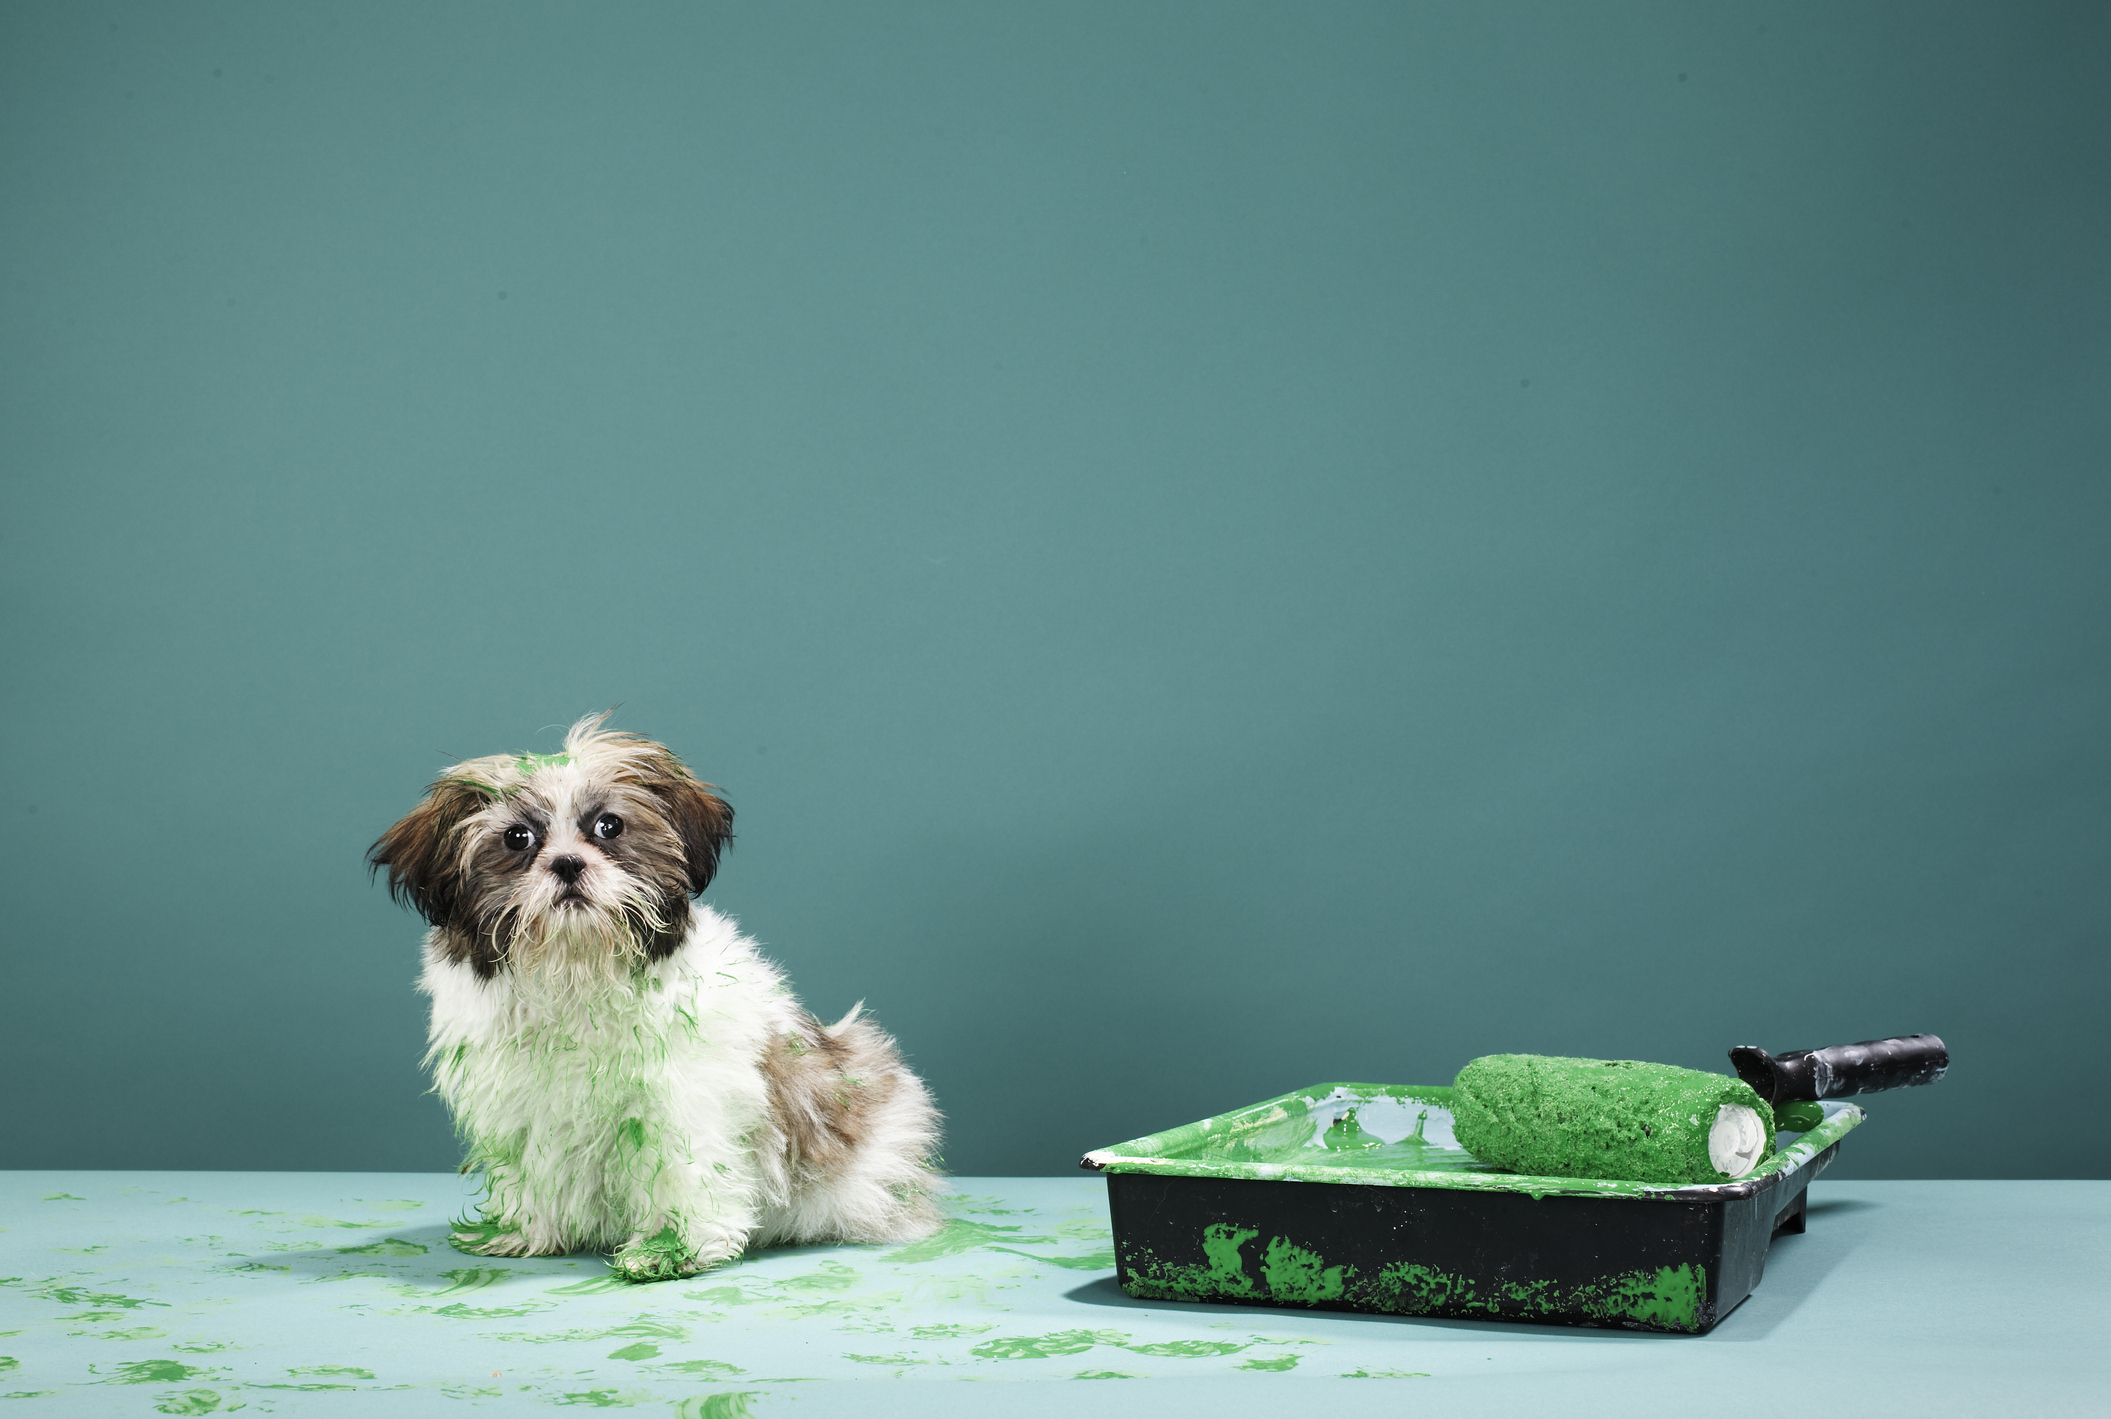 A small dog sits next to an overturned paint tray with green paw prints around